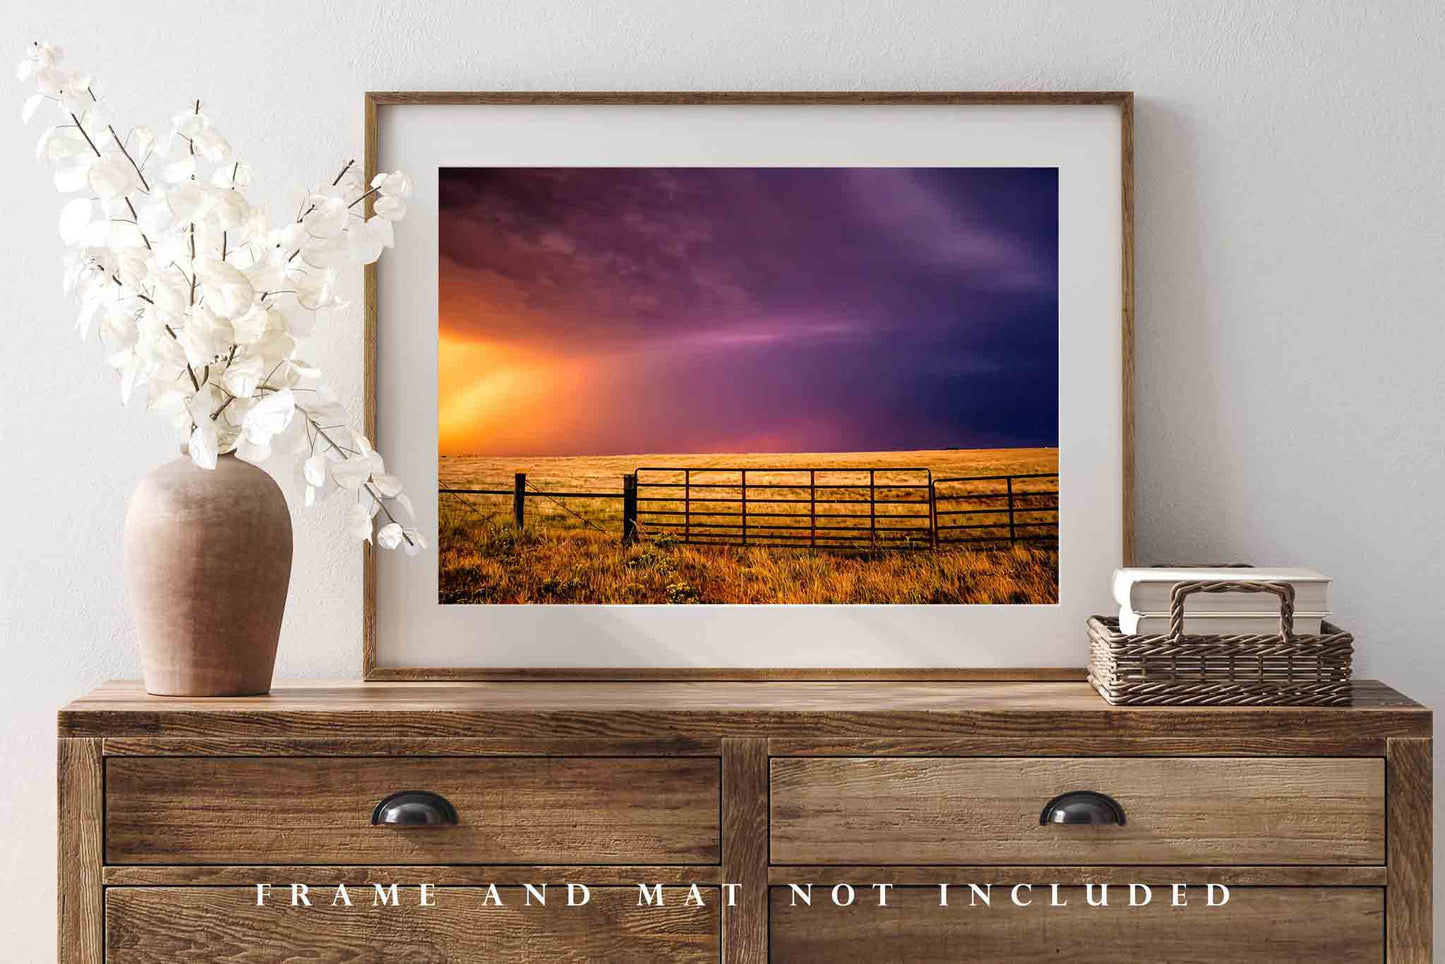 Storm Photography Print (Not Framed) Picture of Colorful Thunderstorm Over Fence Gate at Sunset in Oklahoma Great Plains Wall Art Western Decor